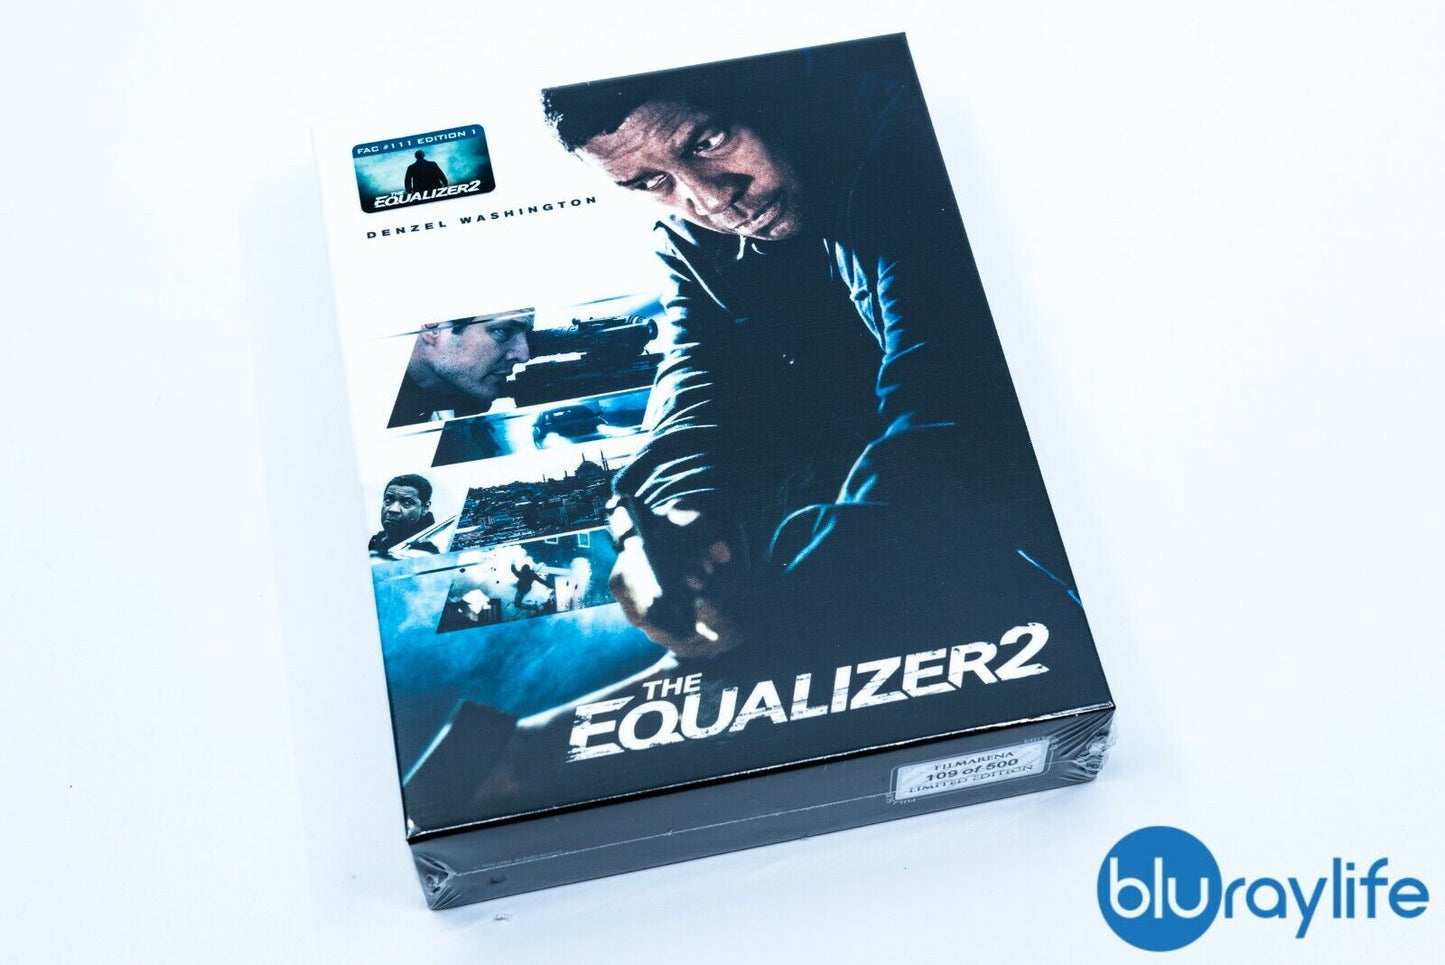 The Equalizer 2 Blu-ray Steelbook Filmarena Collection #111 E1 Lenticular XL Full Slip